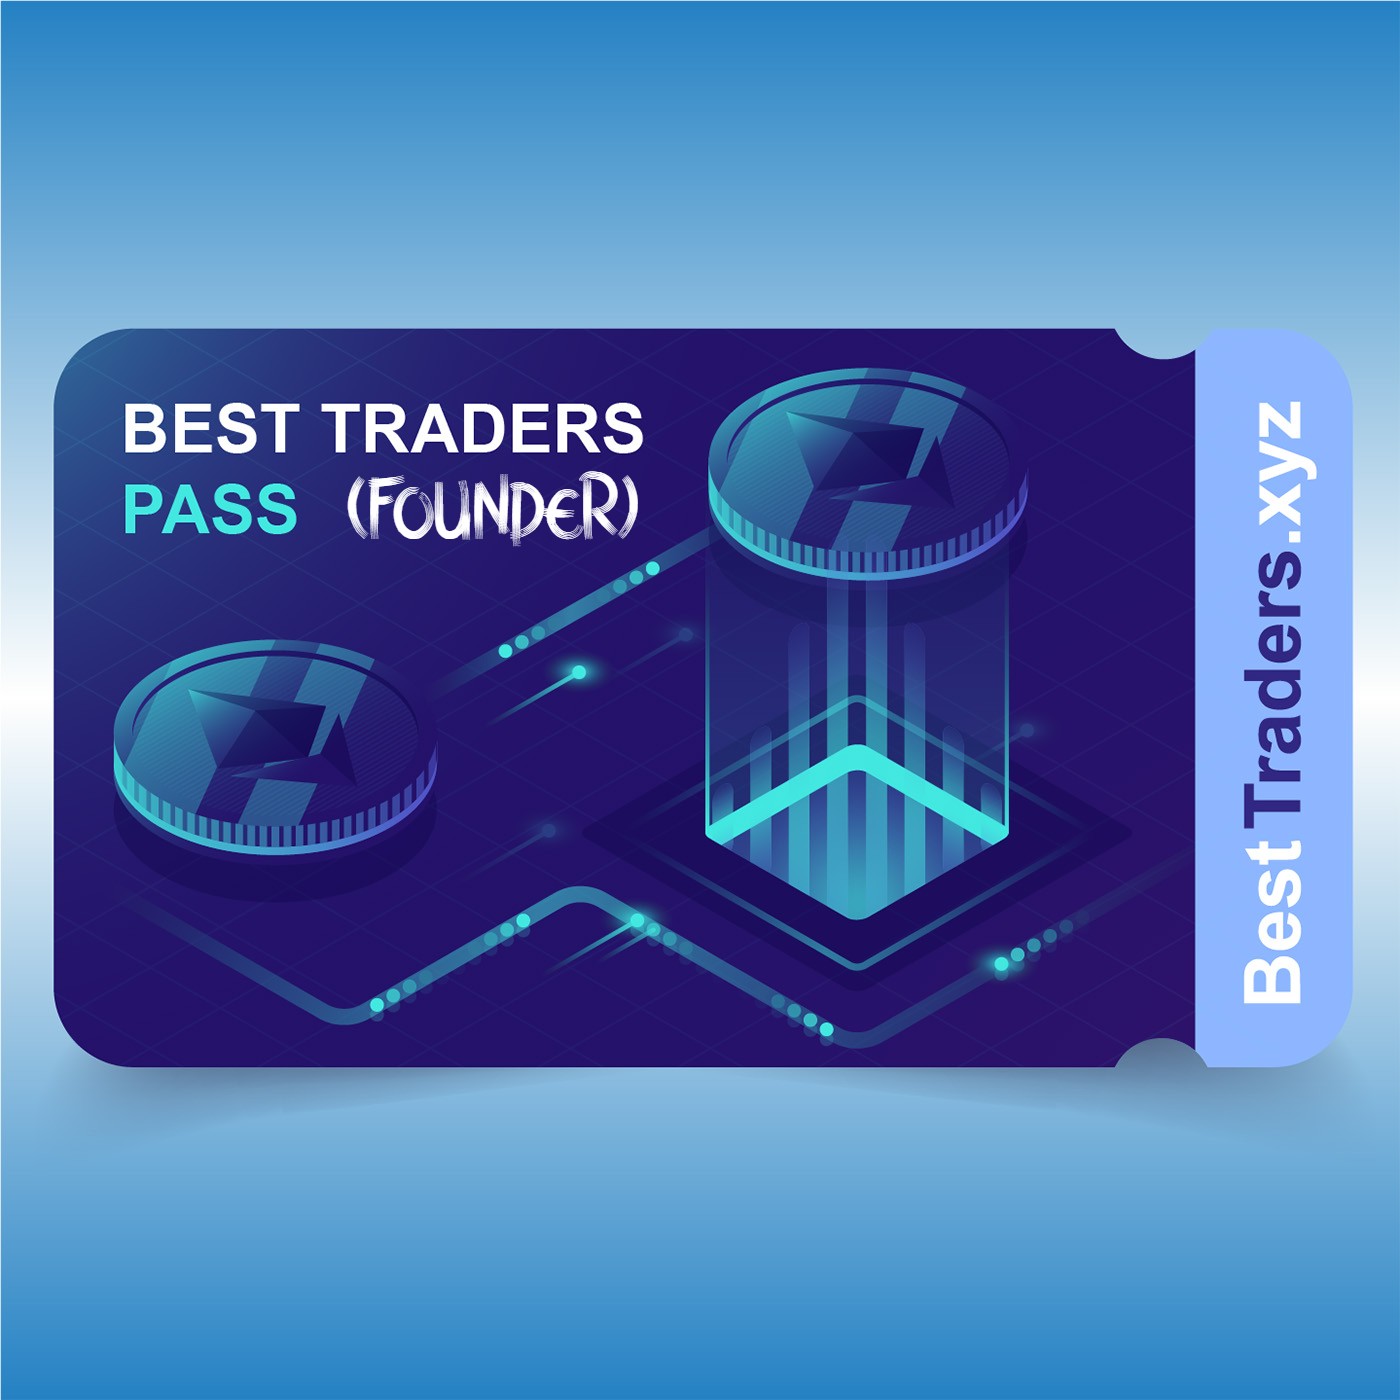 Best Traders - Founder Pass